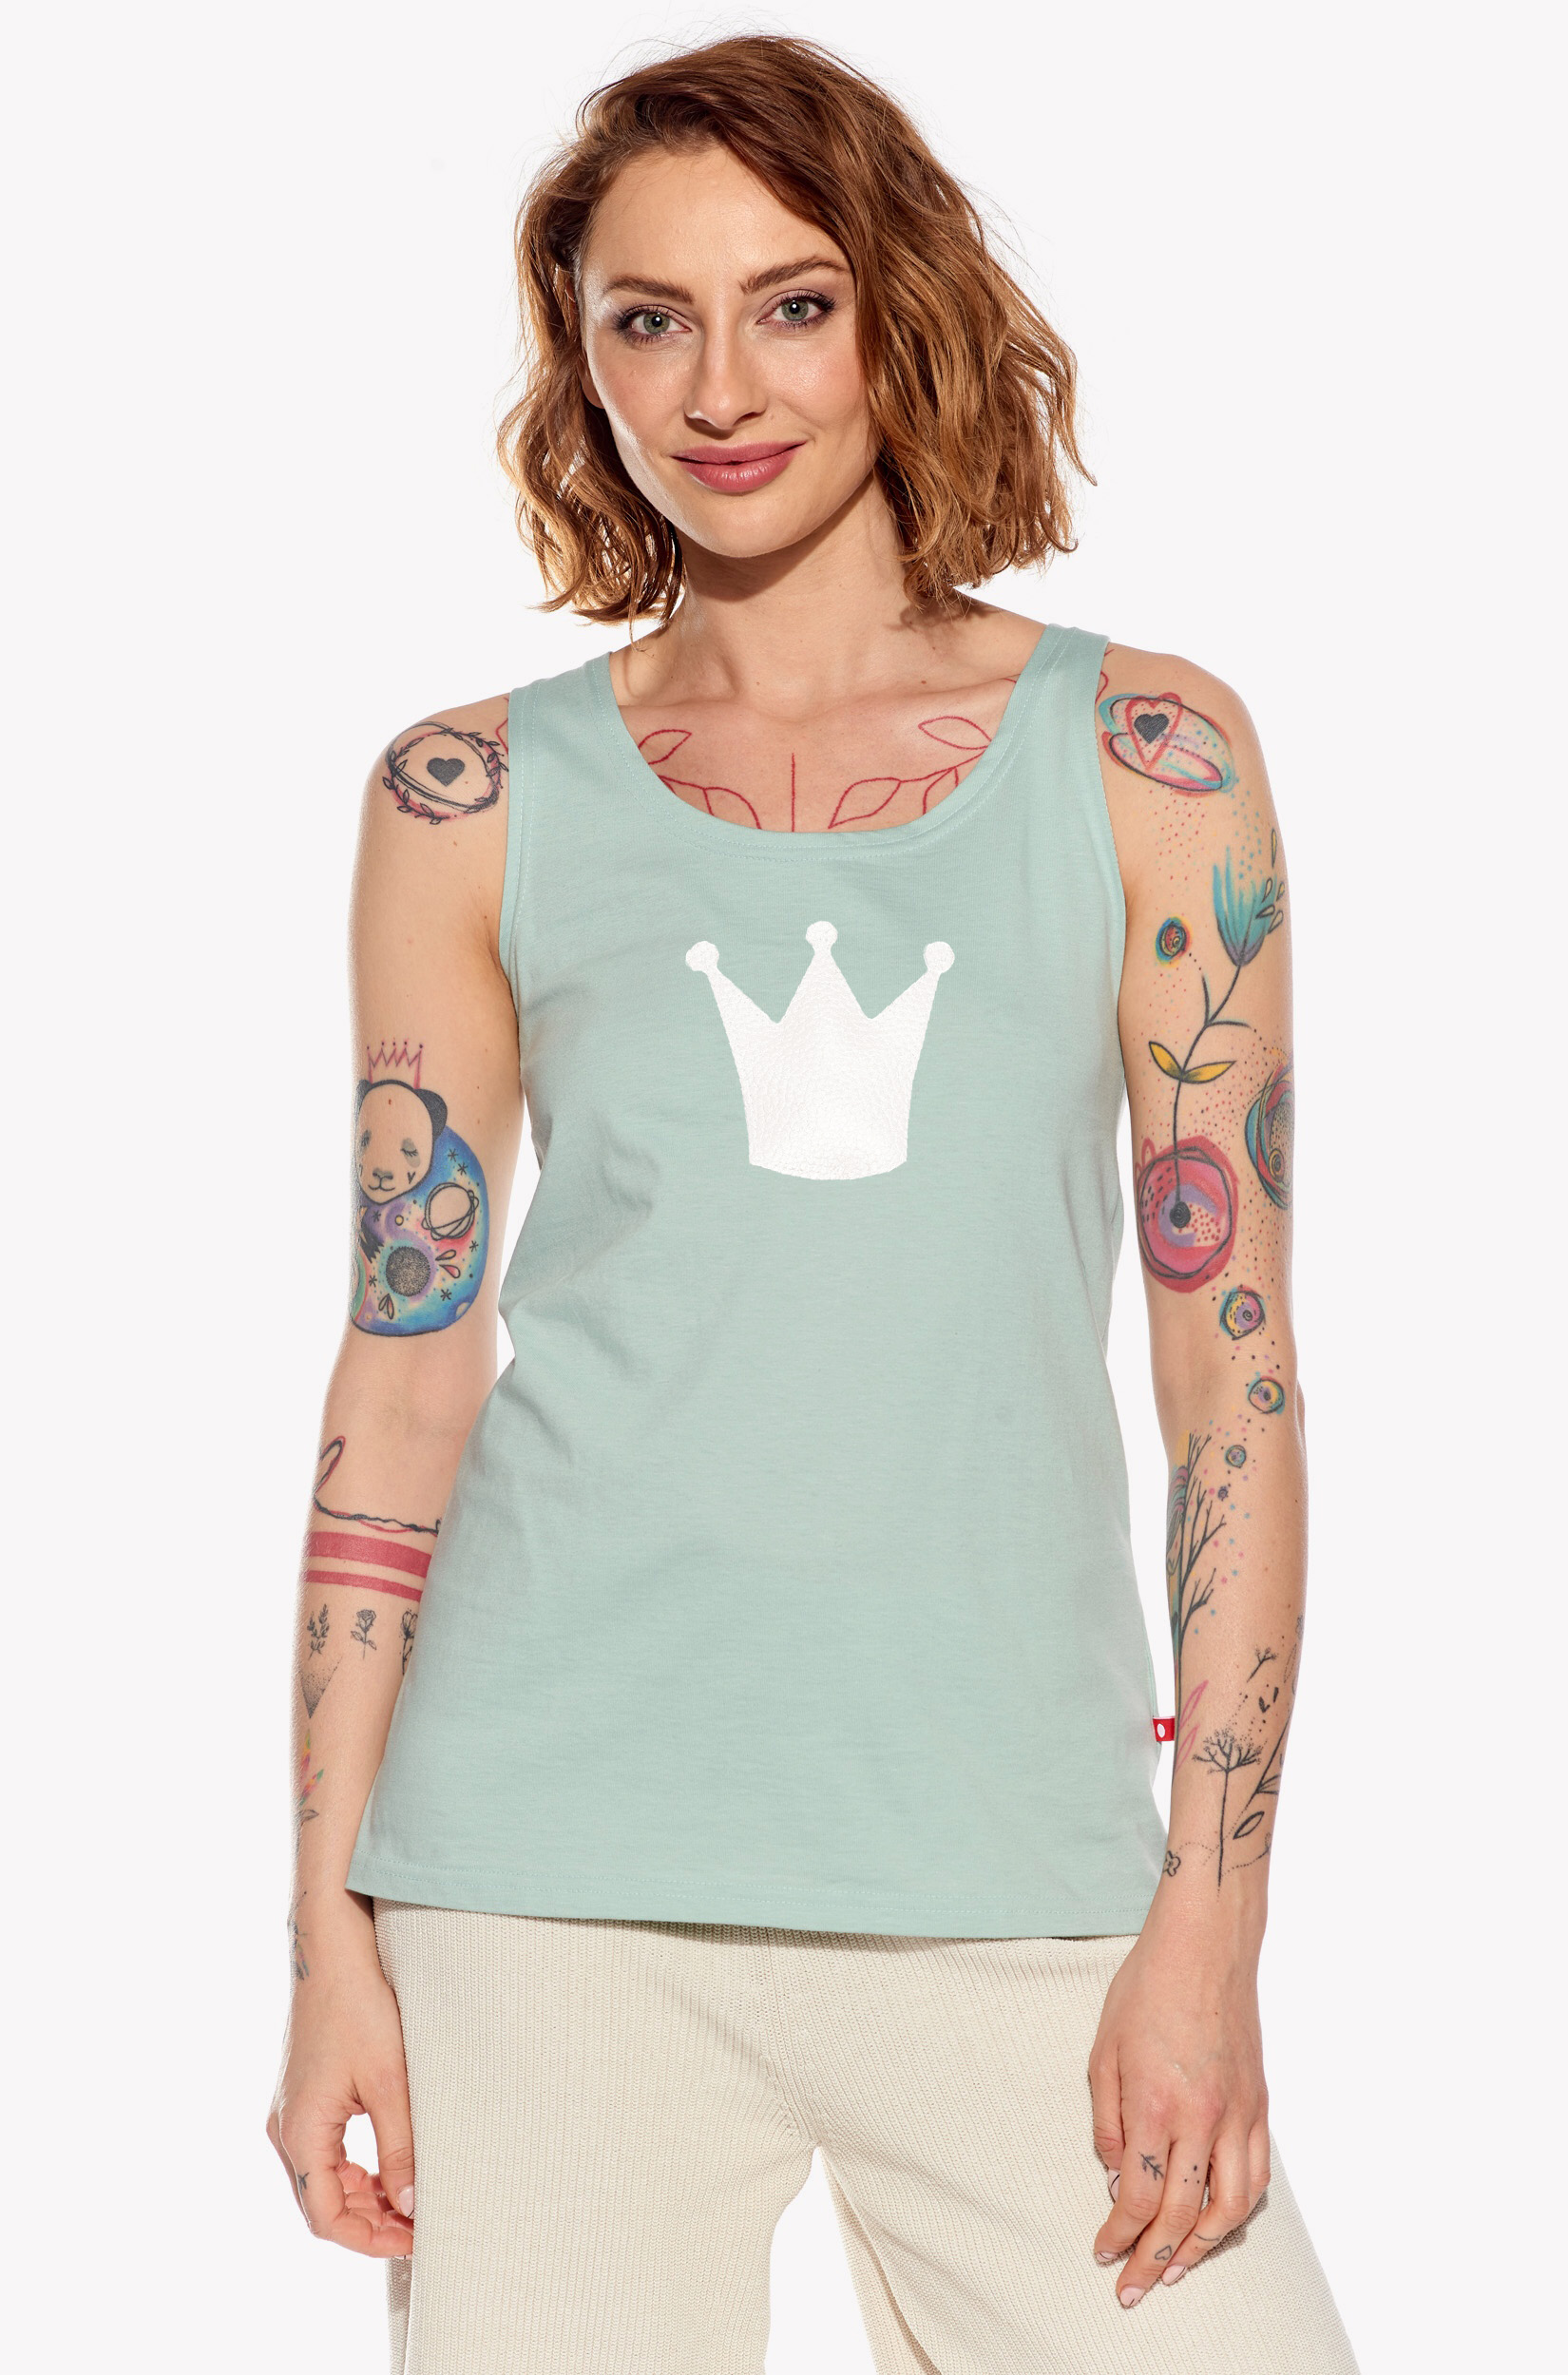 Singlet with crown